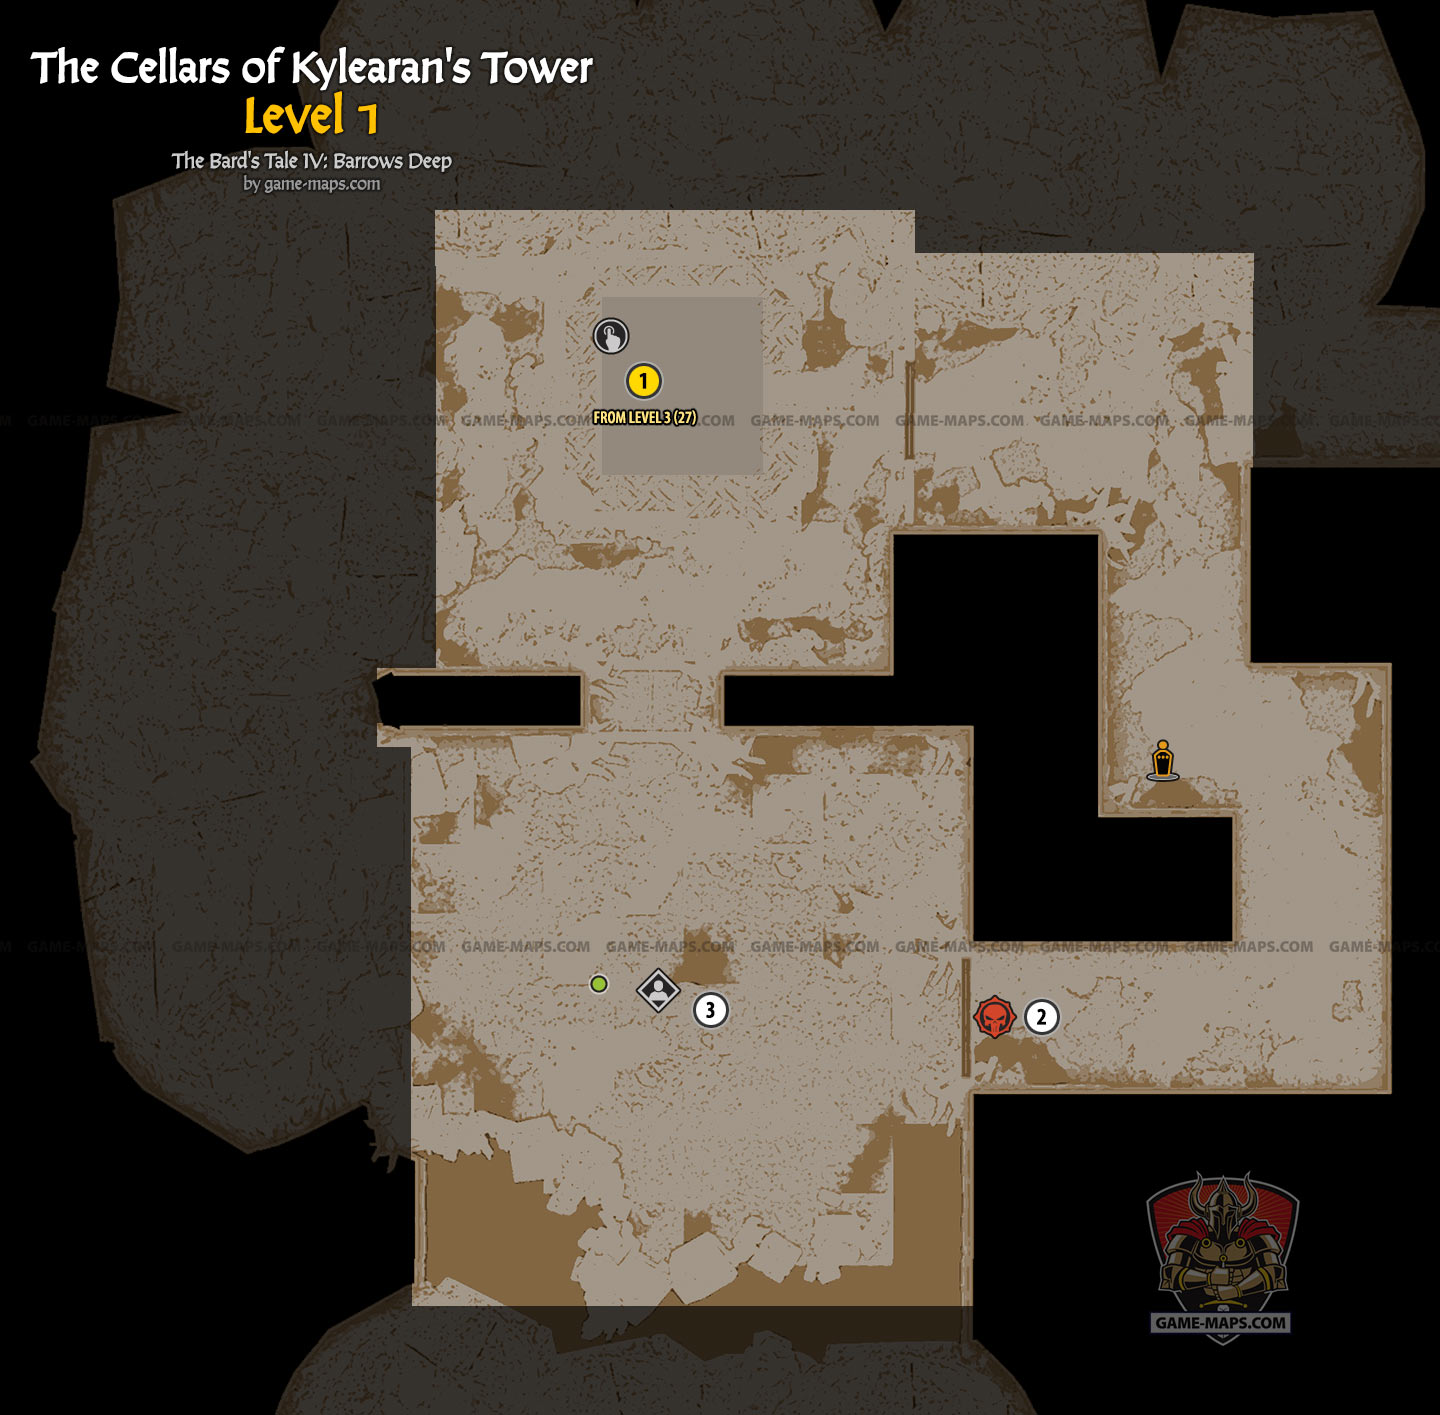 The Cellars of Kylearan's Tower Level 1